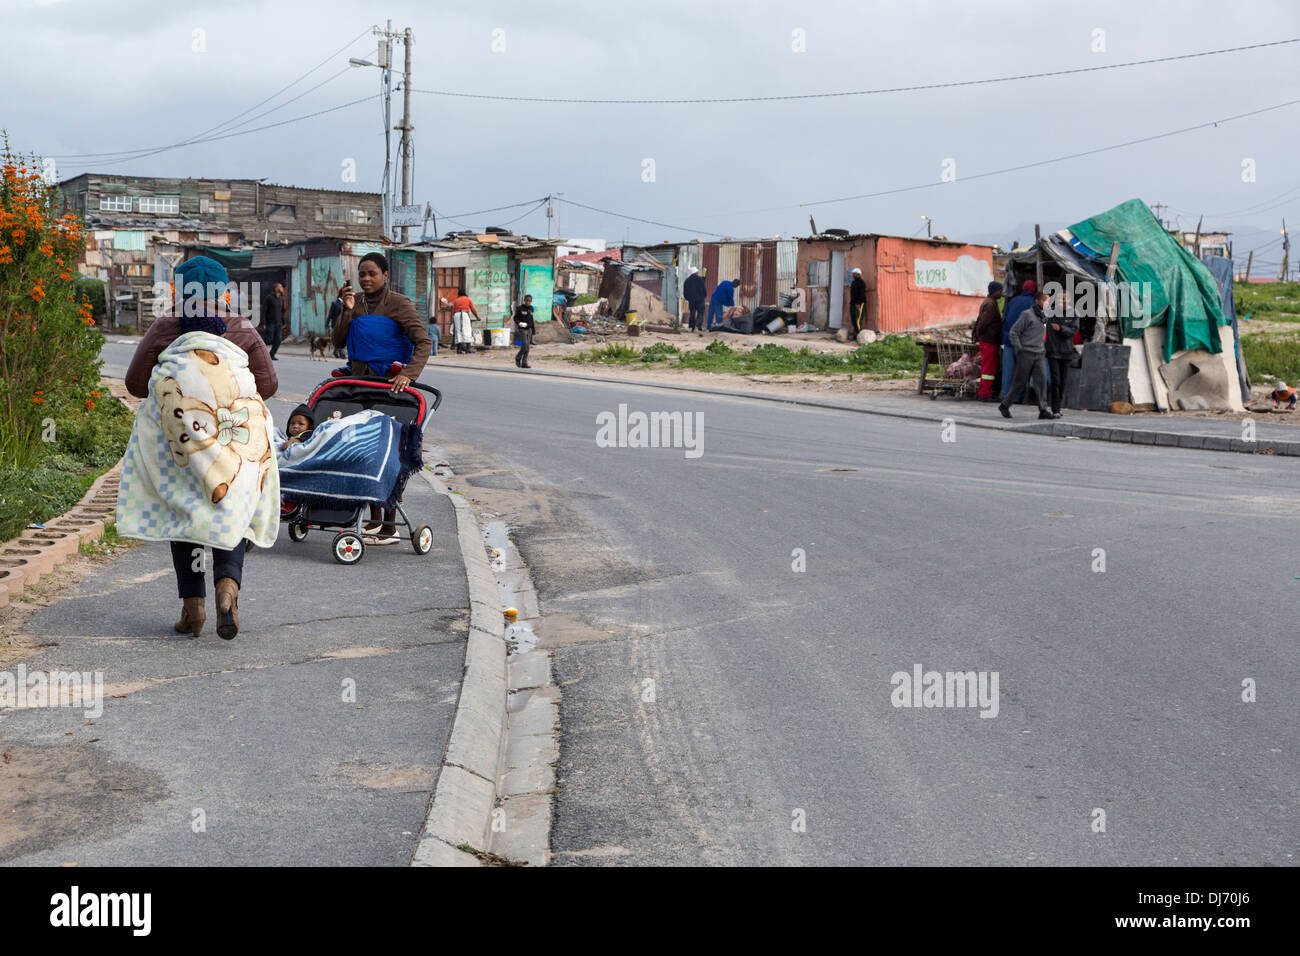 South Africa, Cape Town, Guguletu Township Street Scene. Woman Carrying Baby on Back, Woman Pushing Baby in a Pram (Baby Buggy). Stock Photo